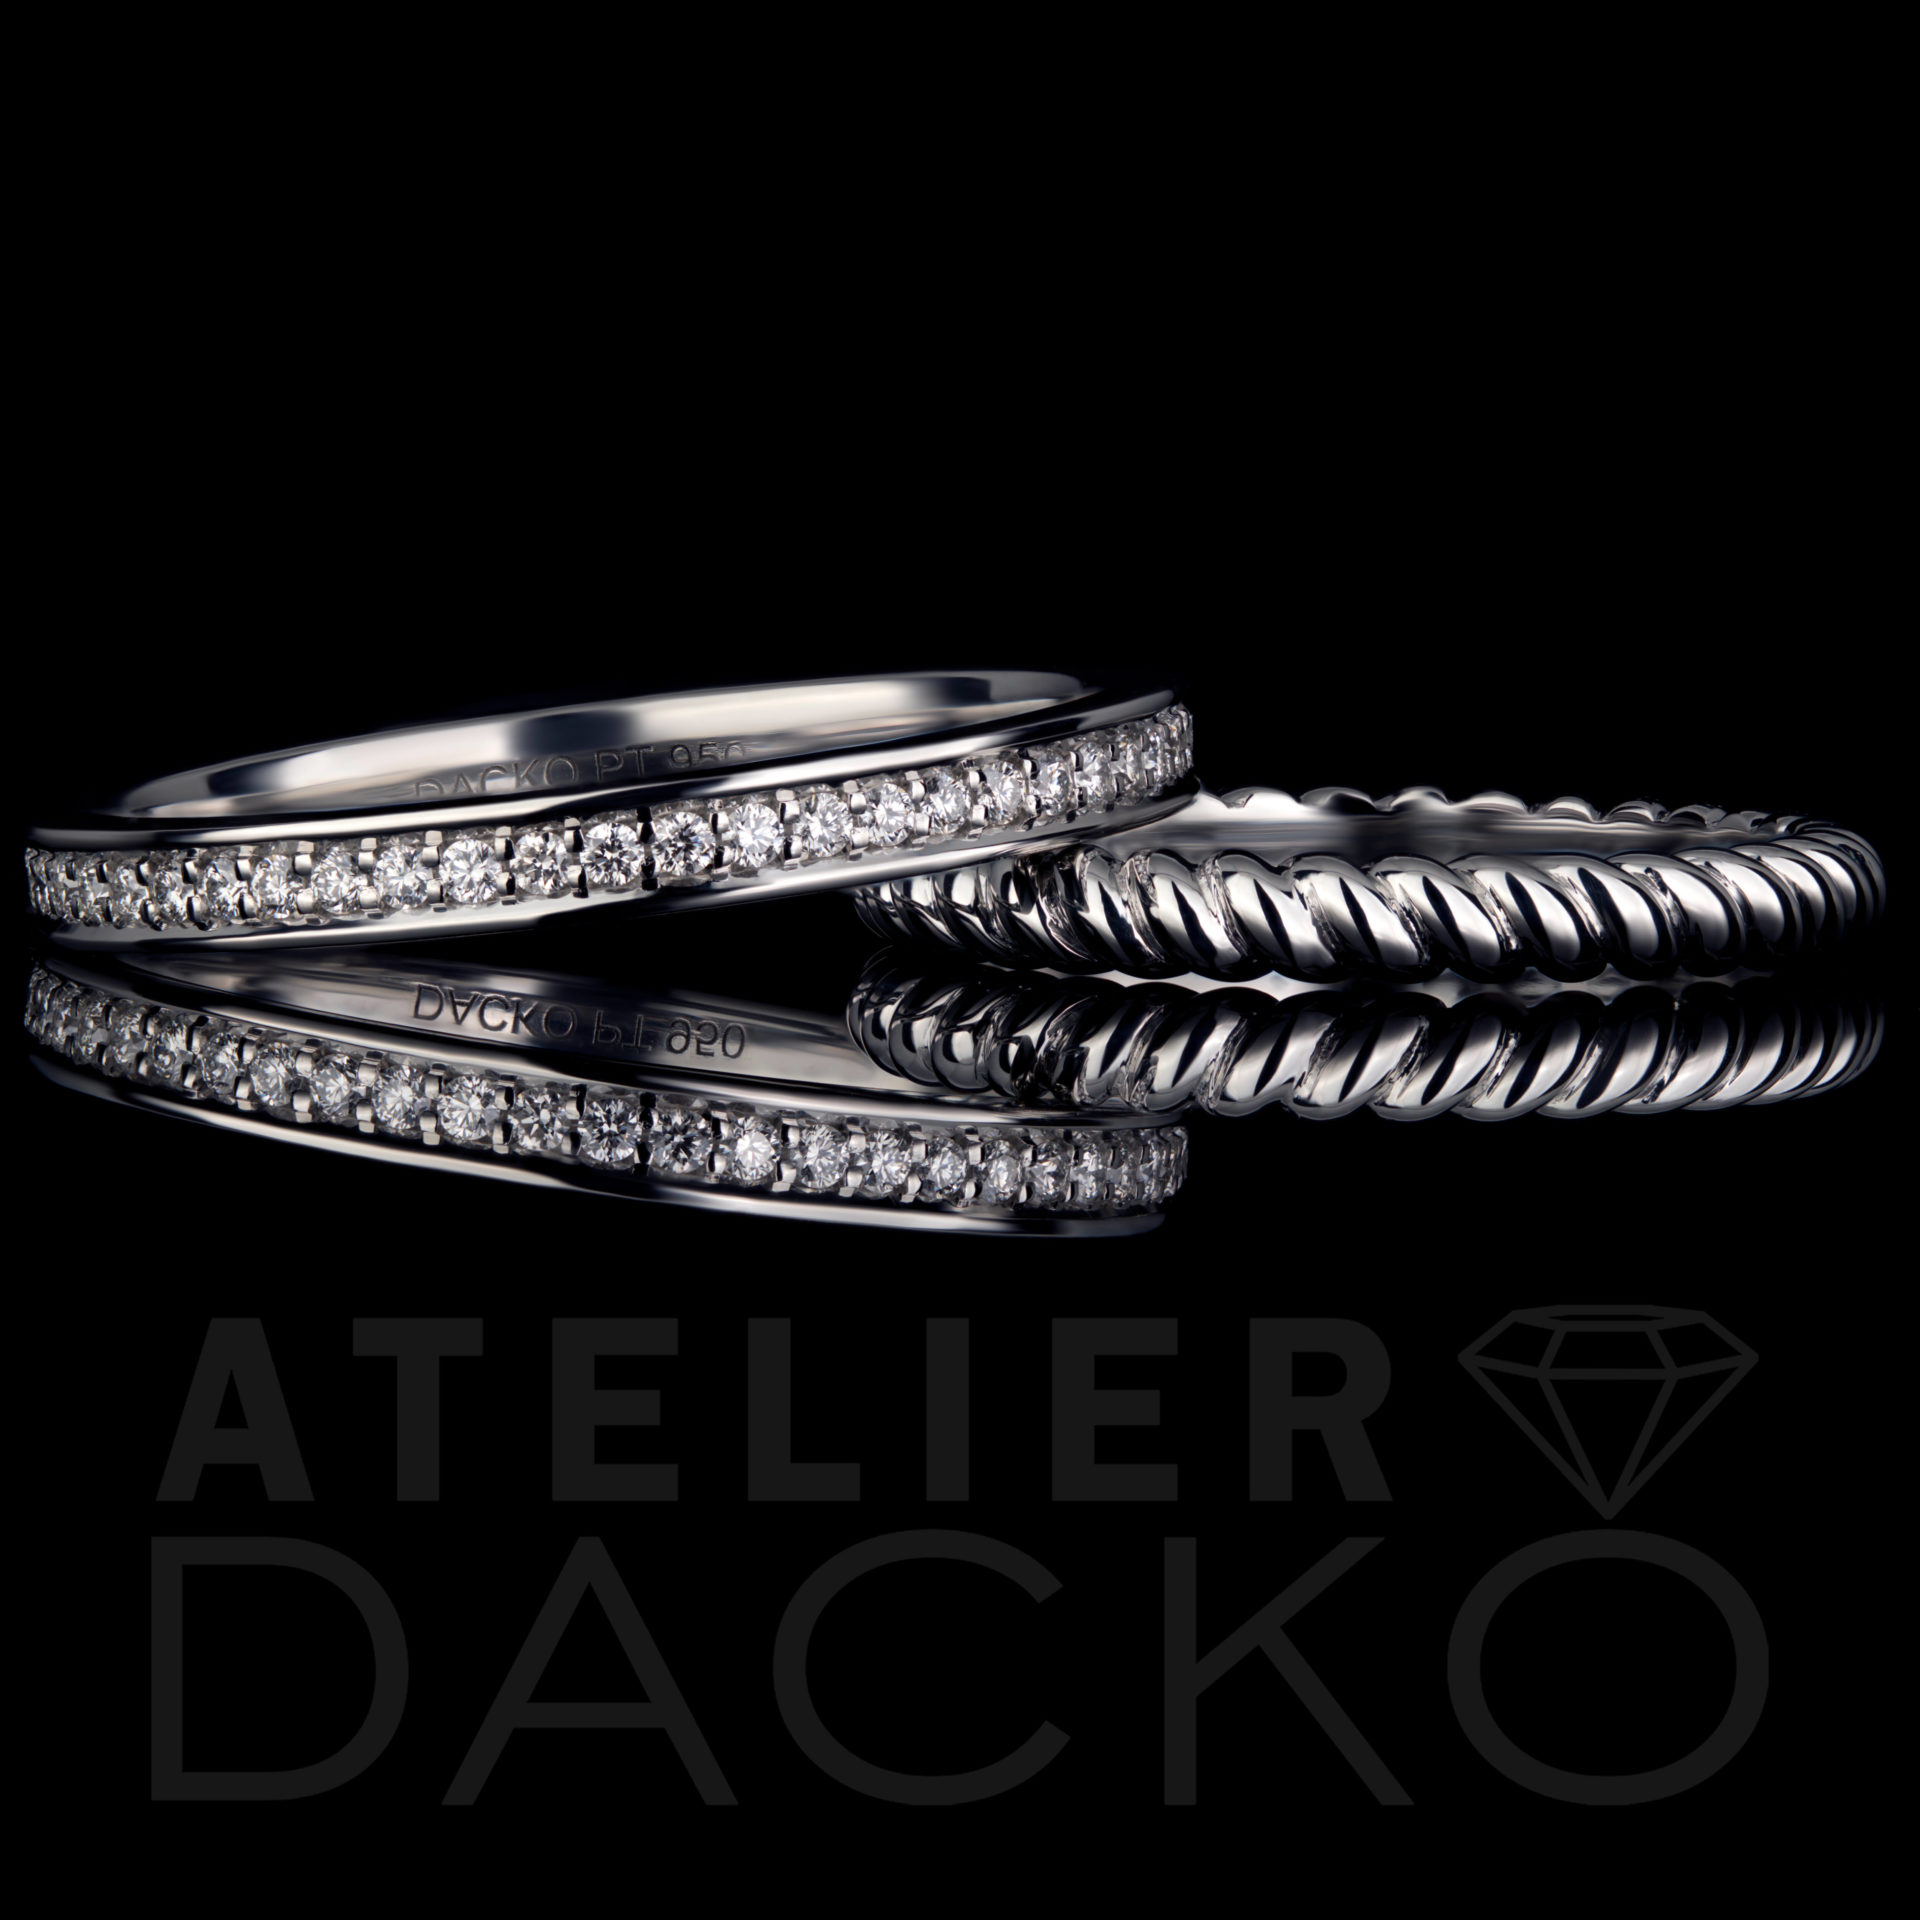 AD020 - His and Hers Platinum Pinky Rings - 1